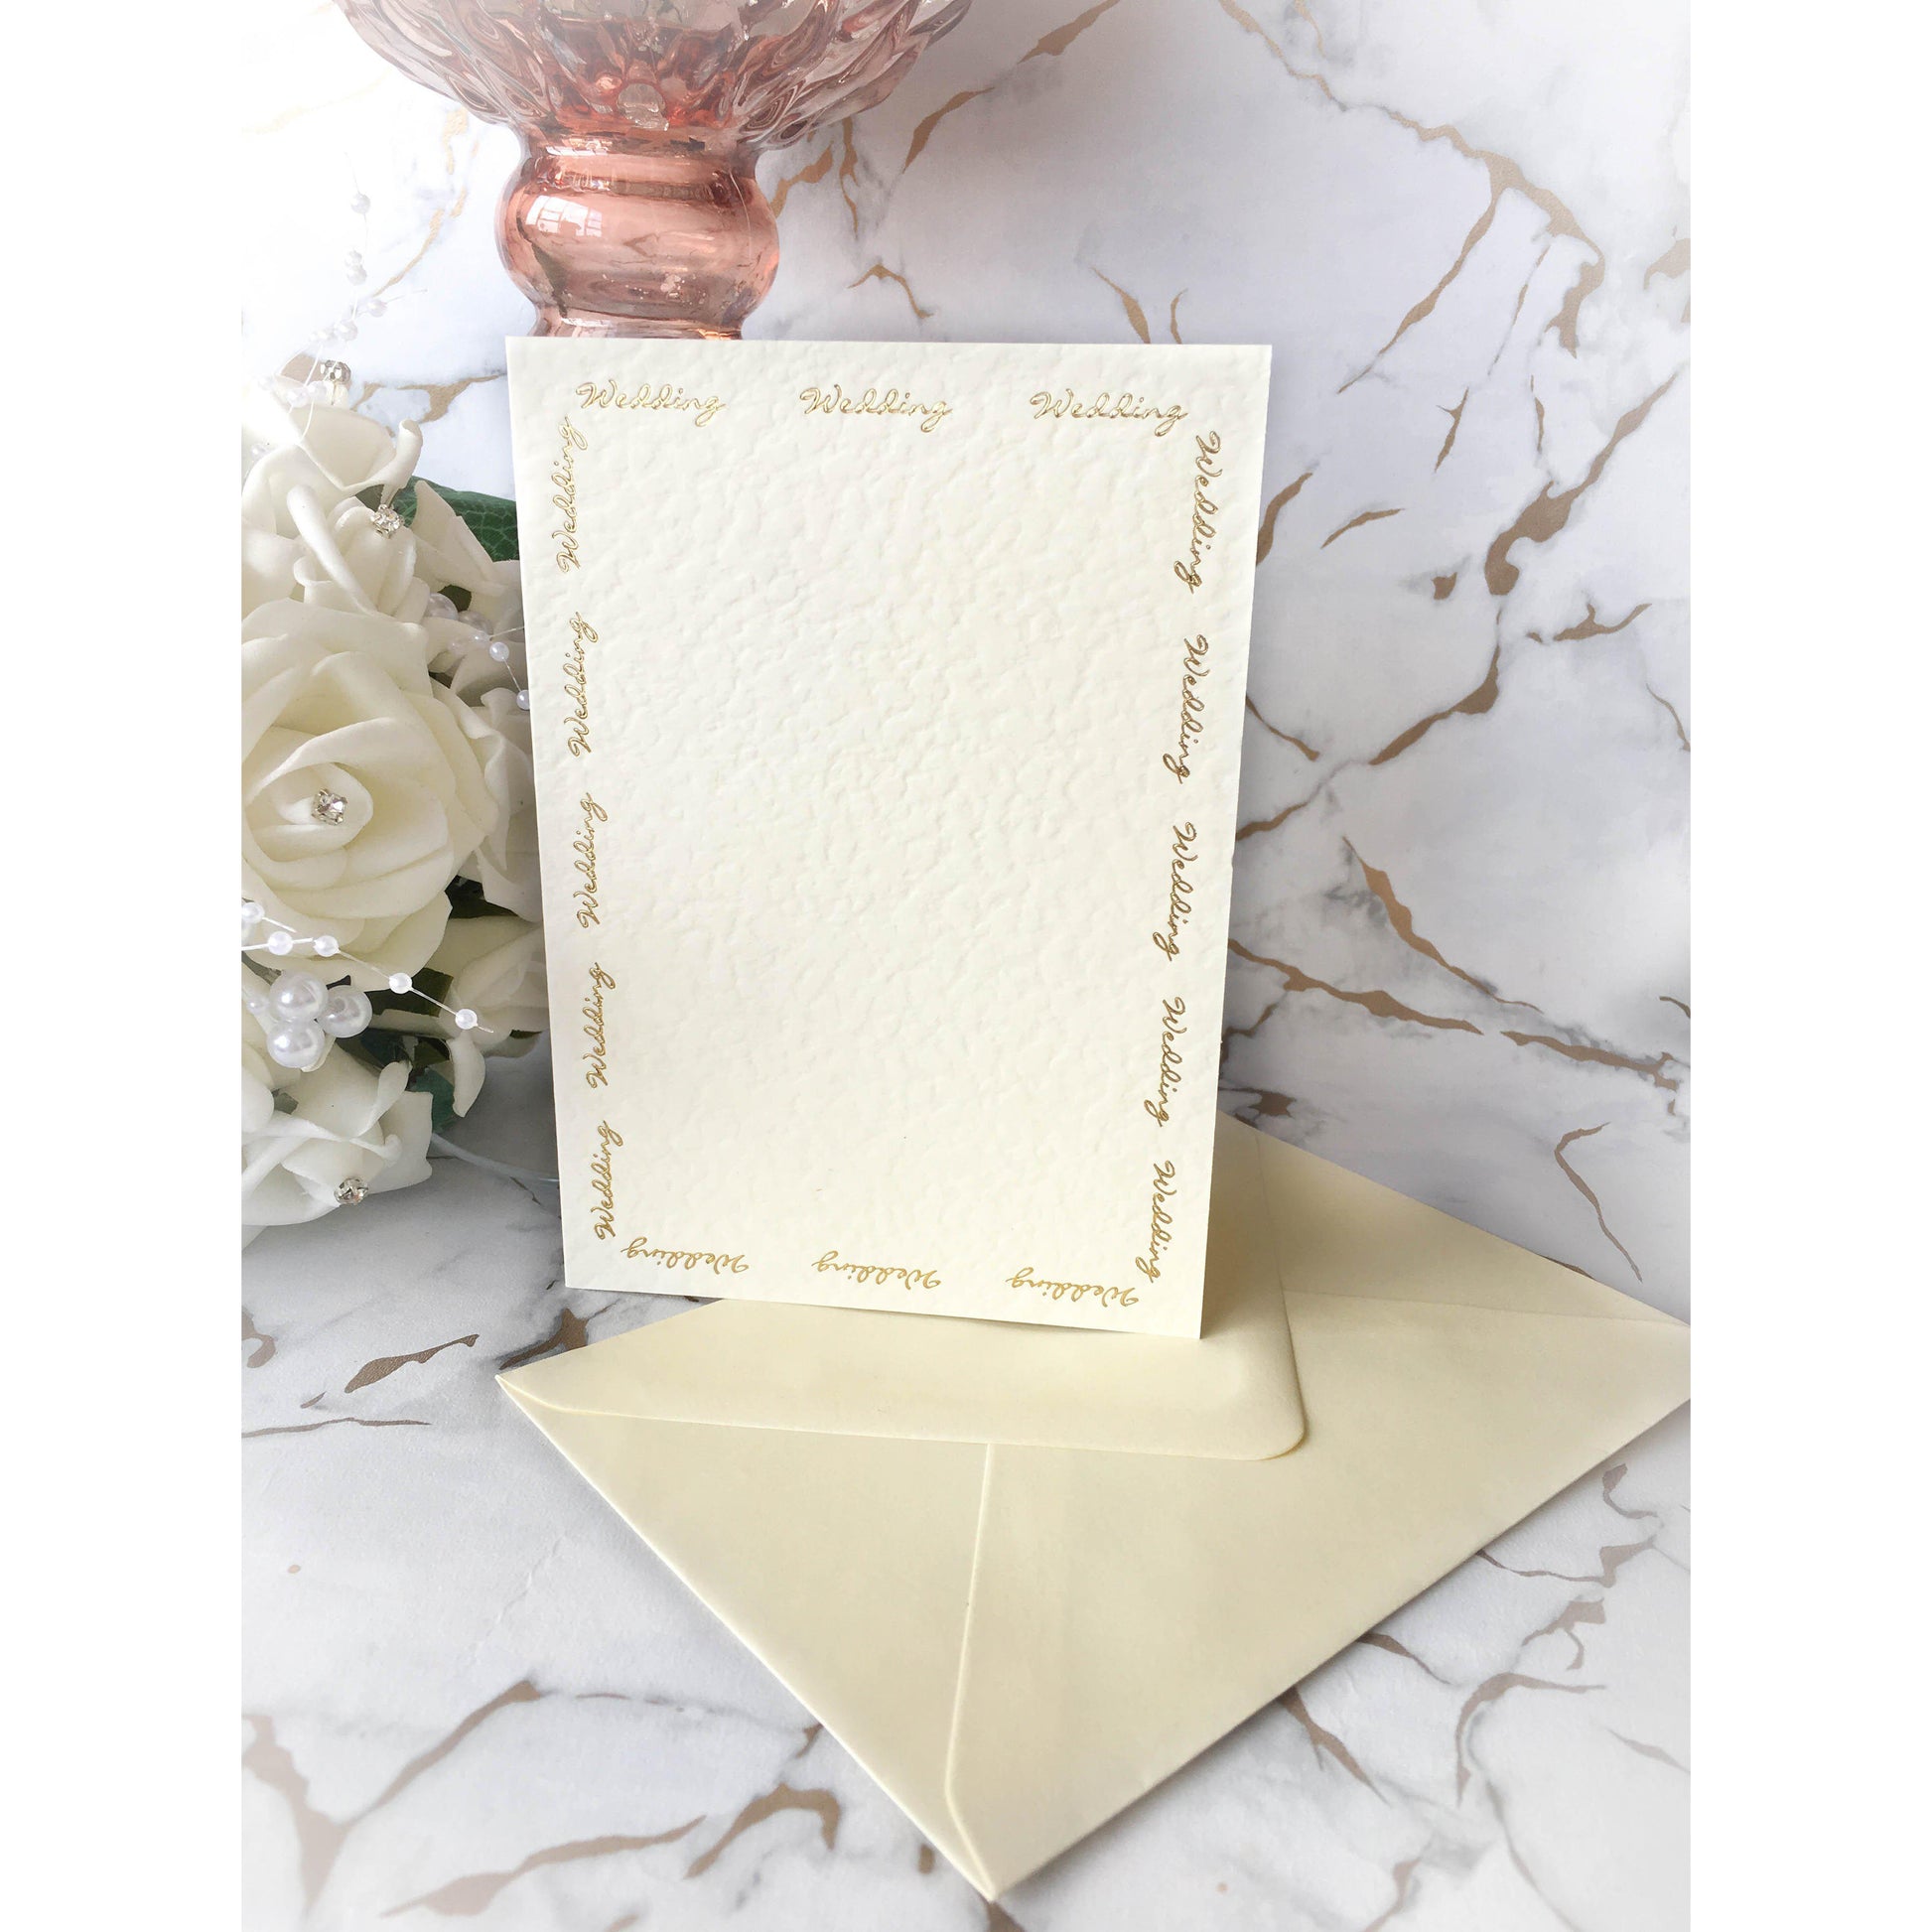 A6 Card Blanks Ivory Hammer Effect With Gold Foil Wedding Script 10pk - Clearance-The Creative Bride